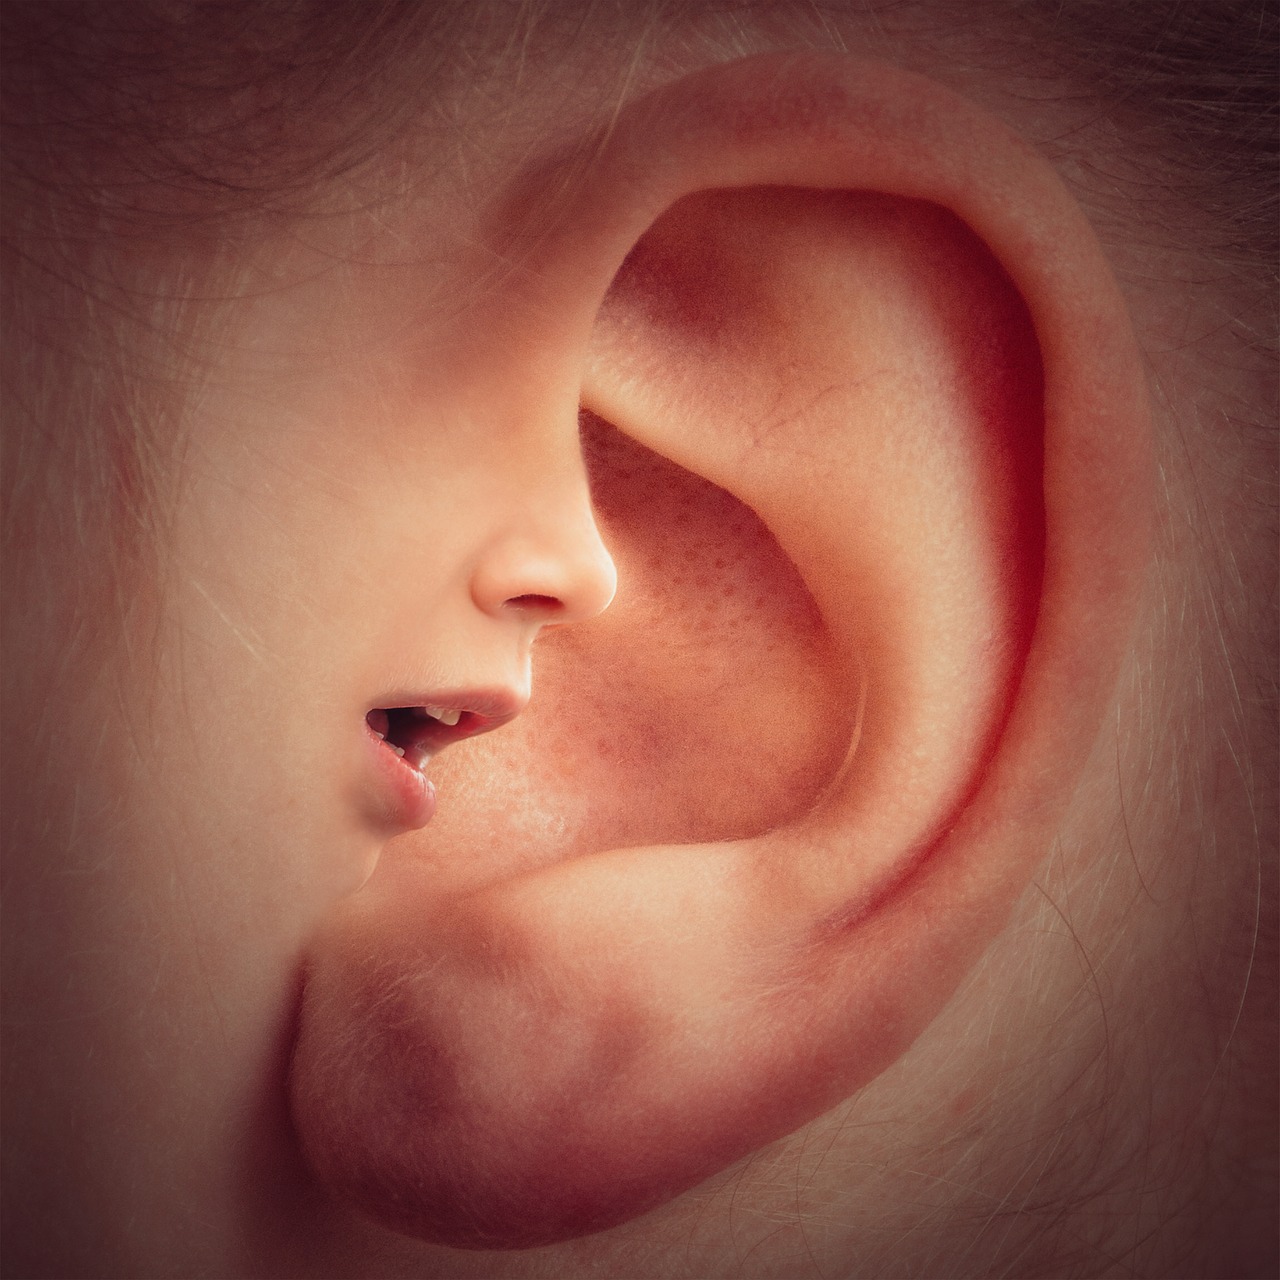 Constant ringing in ears â Causes, Symptoms, and Treatment â The Health ...